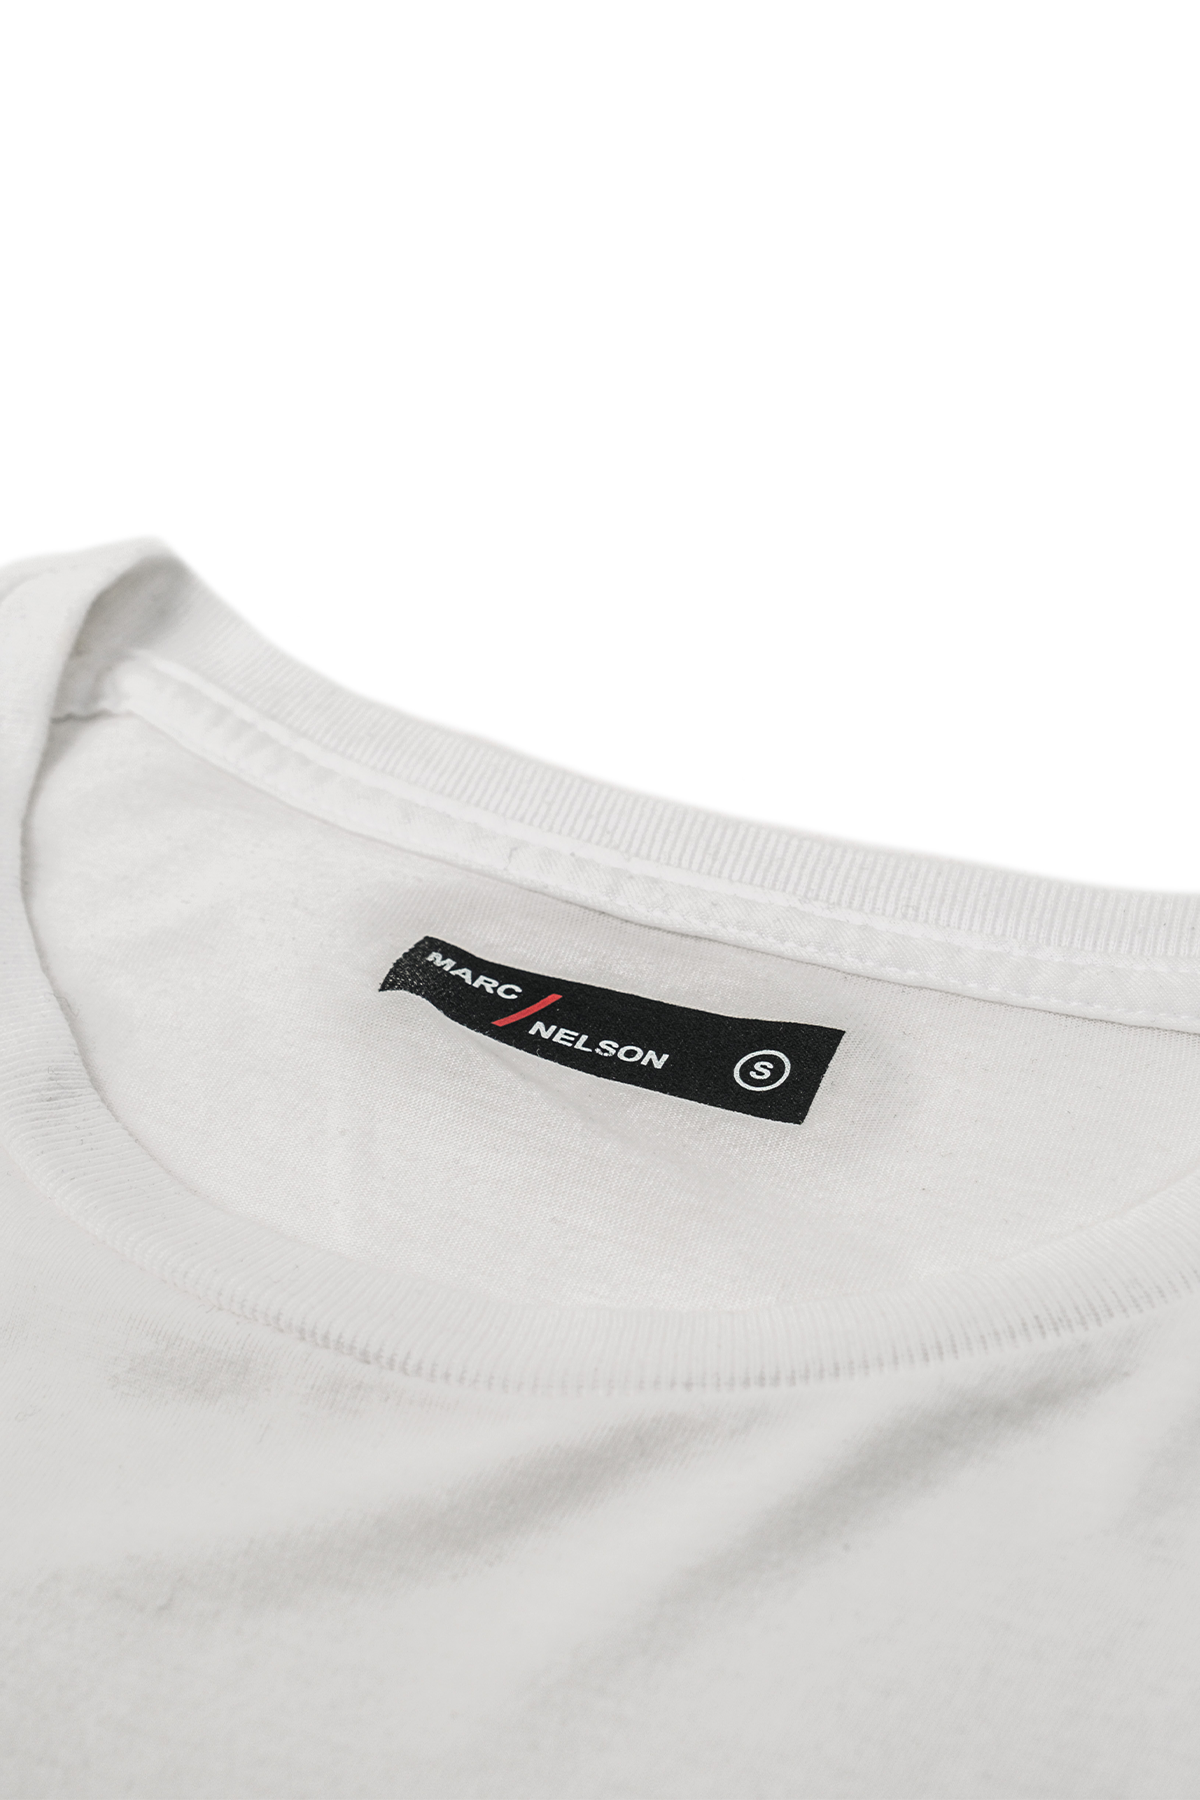 White crew neck t-shirt laid out on a white background close up shot of the tag